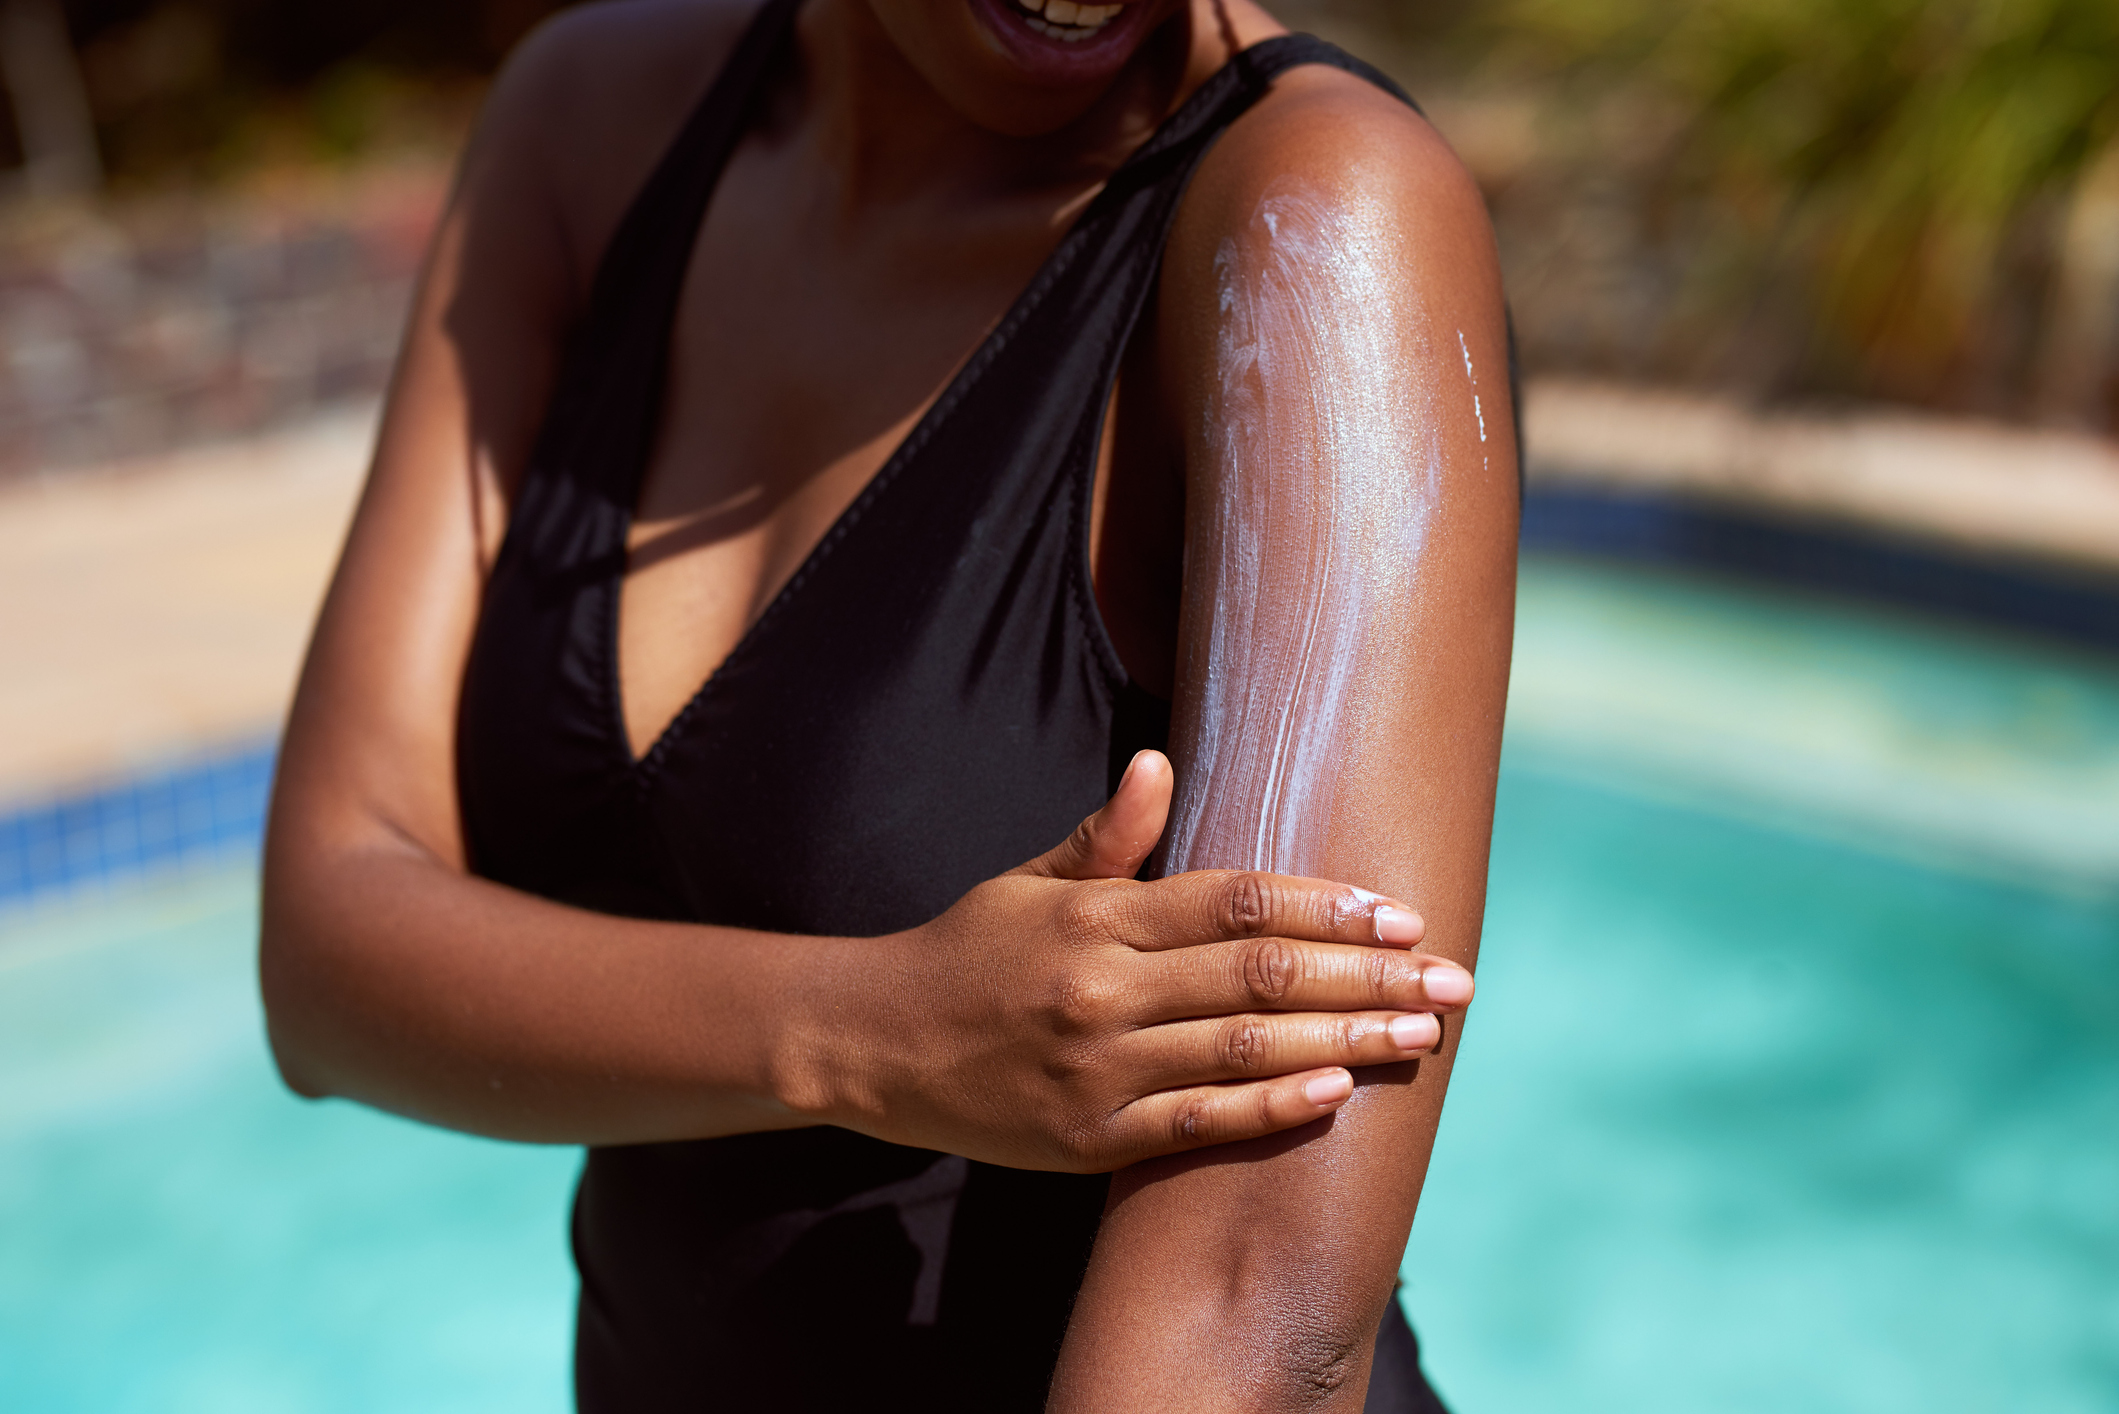 THE FEED: Sun Protection All Summer Long